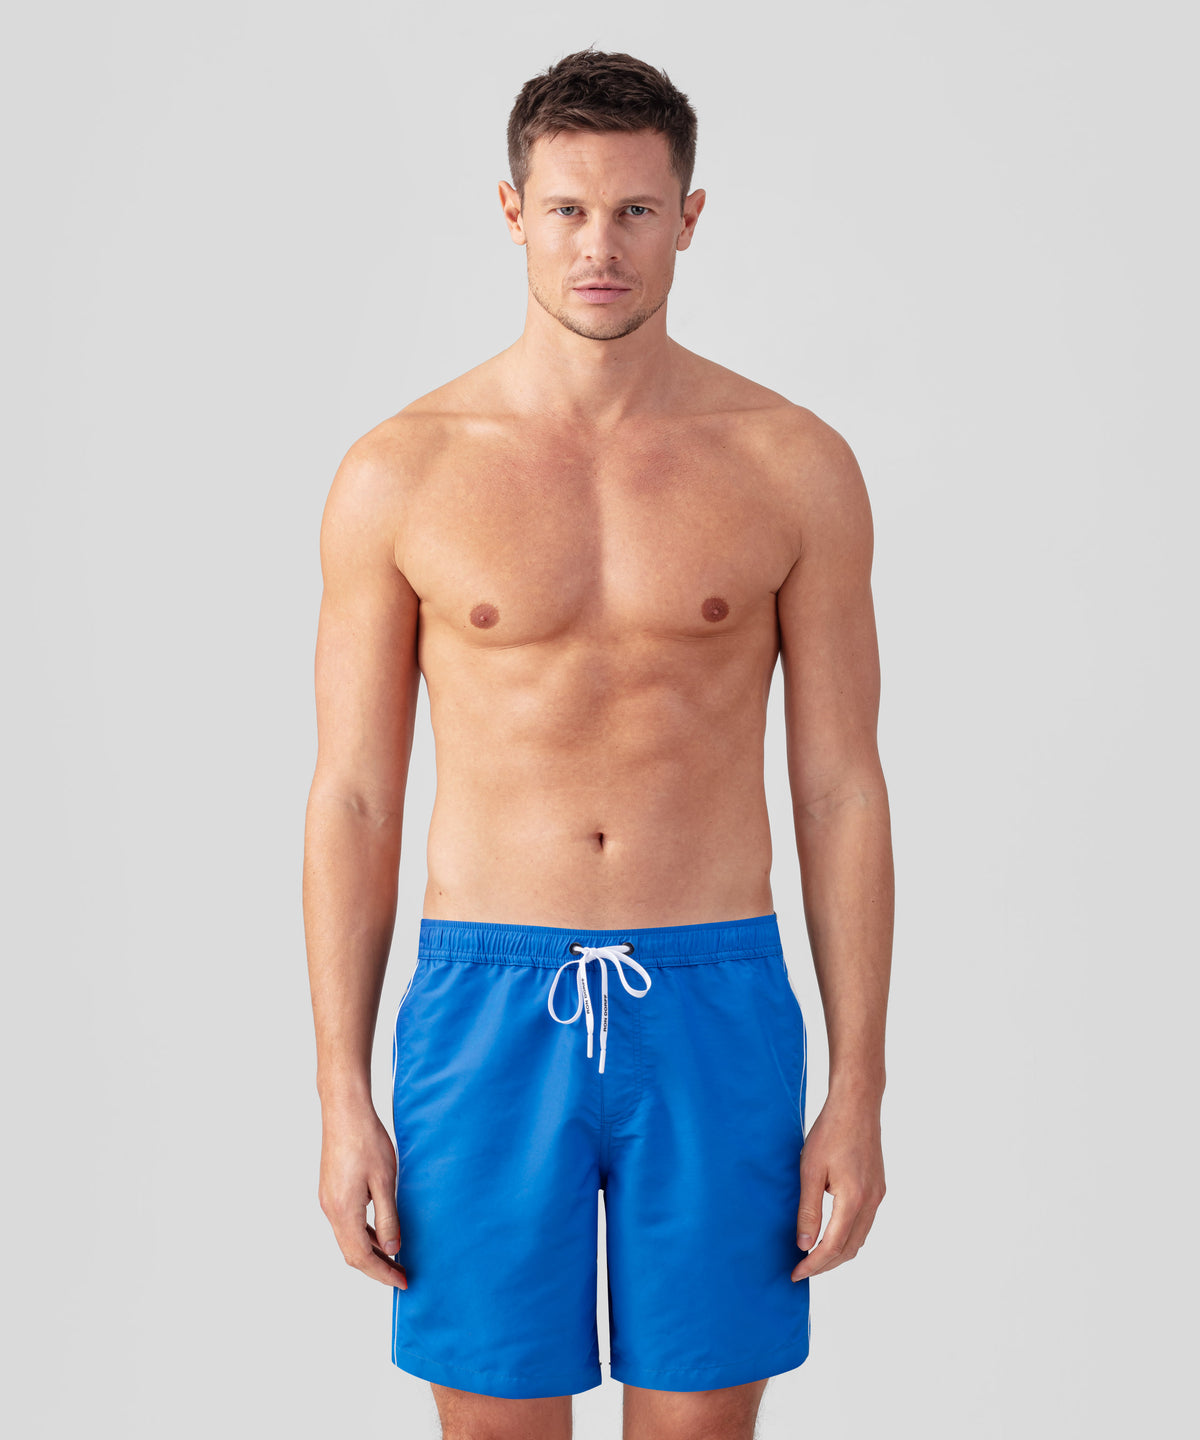 Board Shorts: French Blue